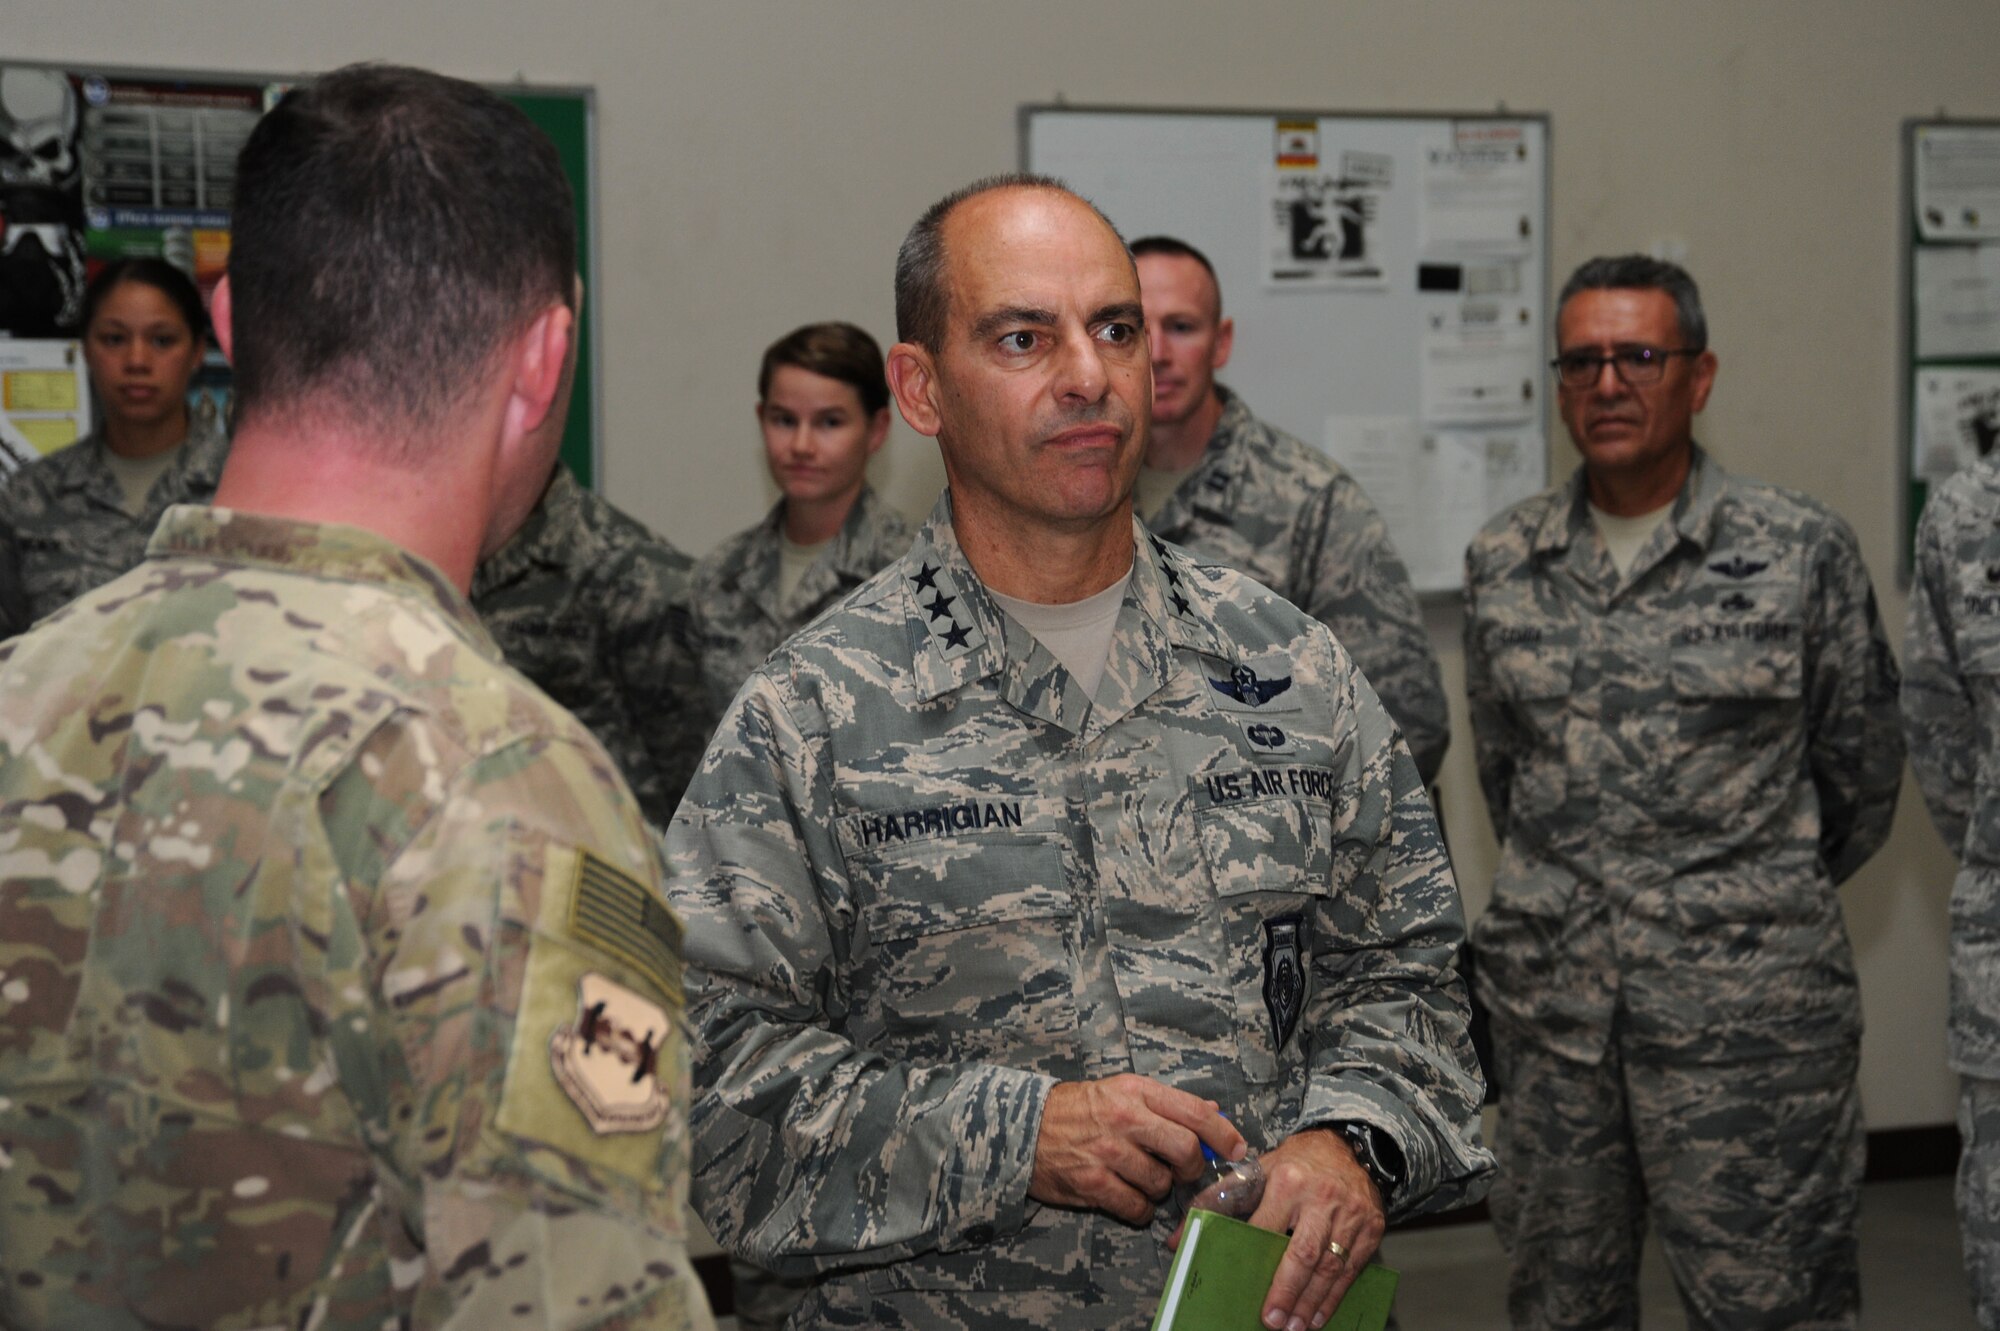 Lt. Gen. Jeffrey Harrigian, U.S. Air Forces Central Command commander, is briefed by Lt. Col. Corey Reed, 386th Expeditionary Operations Group deputy commander, Aug. 21, 2016, at an undisclosed location in Southwest Asia. Harrigian made his first visit to the base after taking command of AFCENT last month. (U.S. Air Force photo/Senior Airman Zachary Kee)